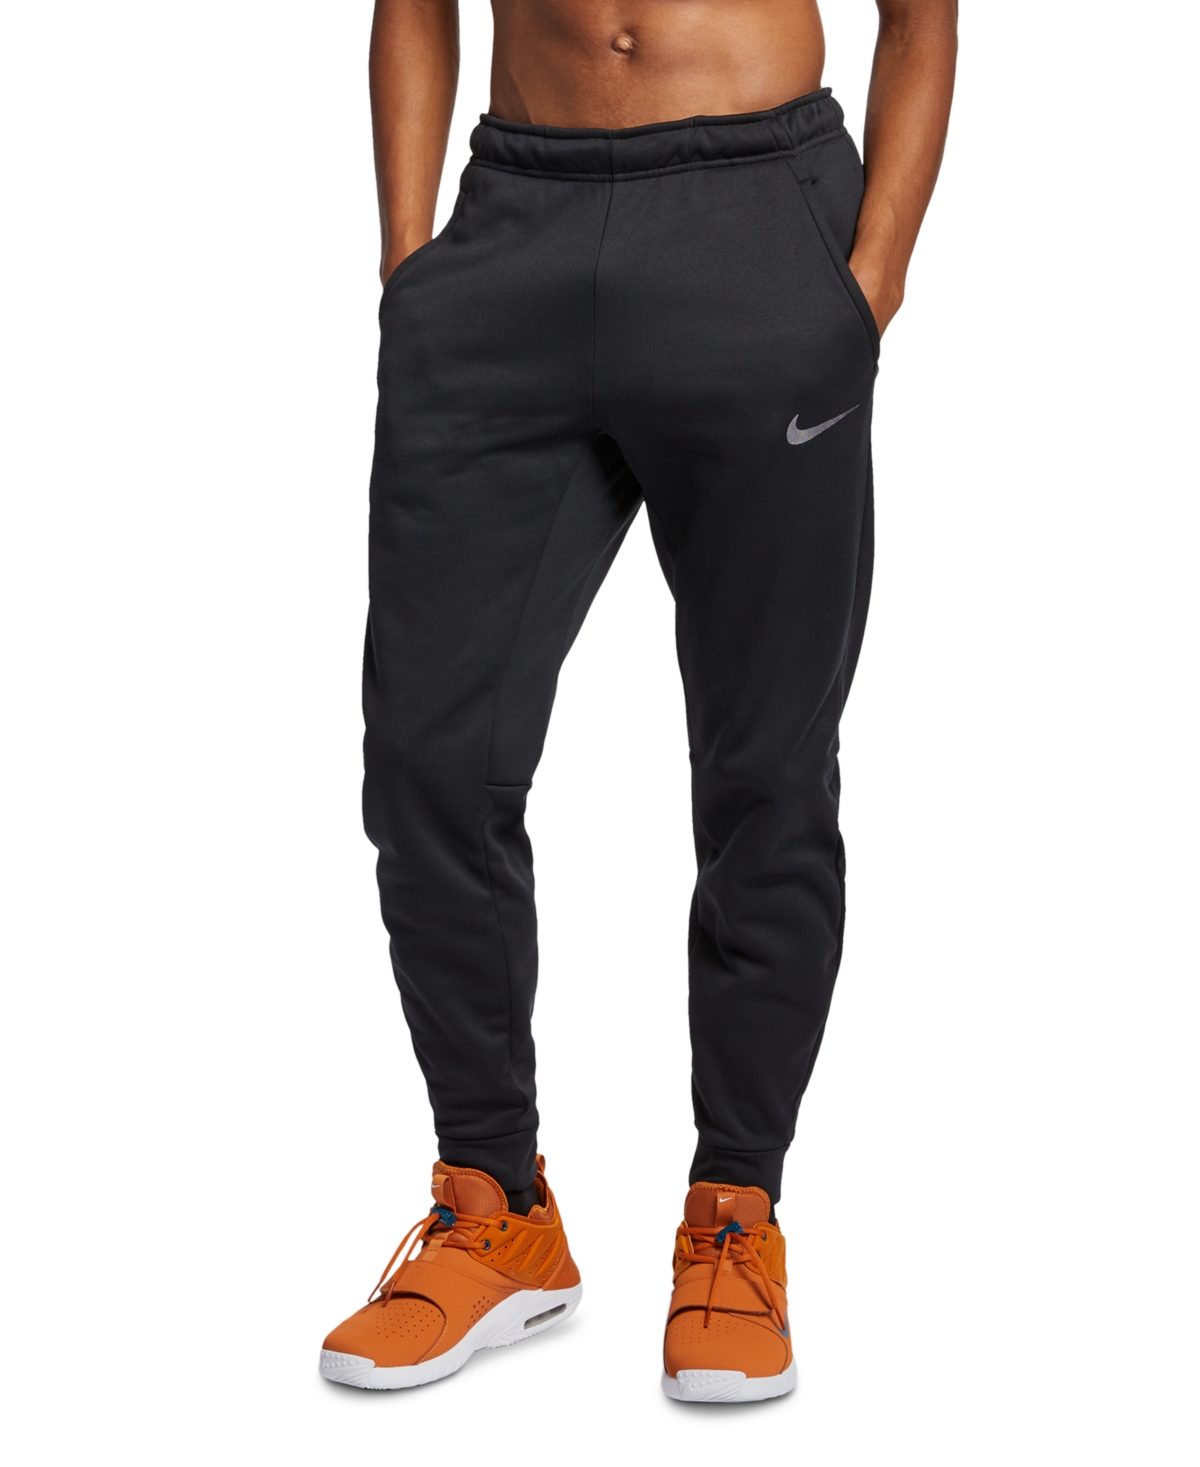 UPC 886668335834 product image for Nike Men's Therma Tapered Training Pants | upcitemdb.com